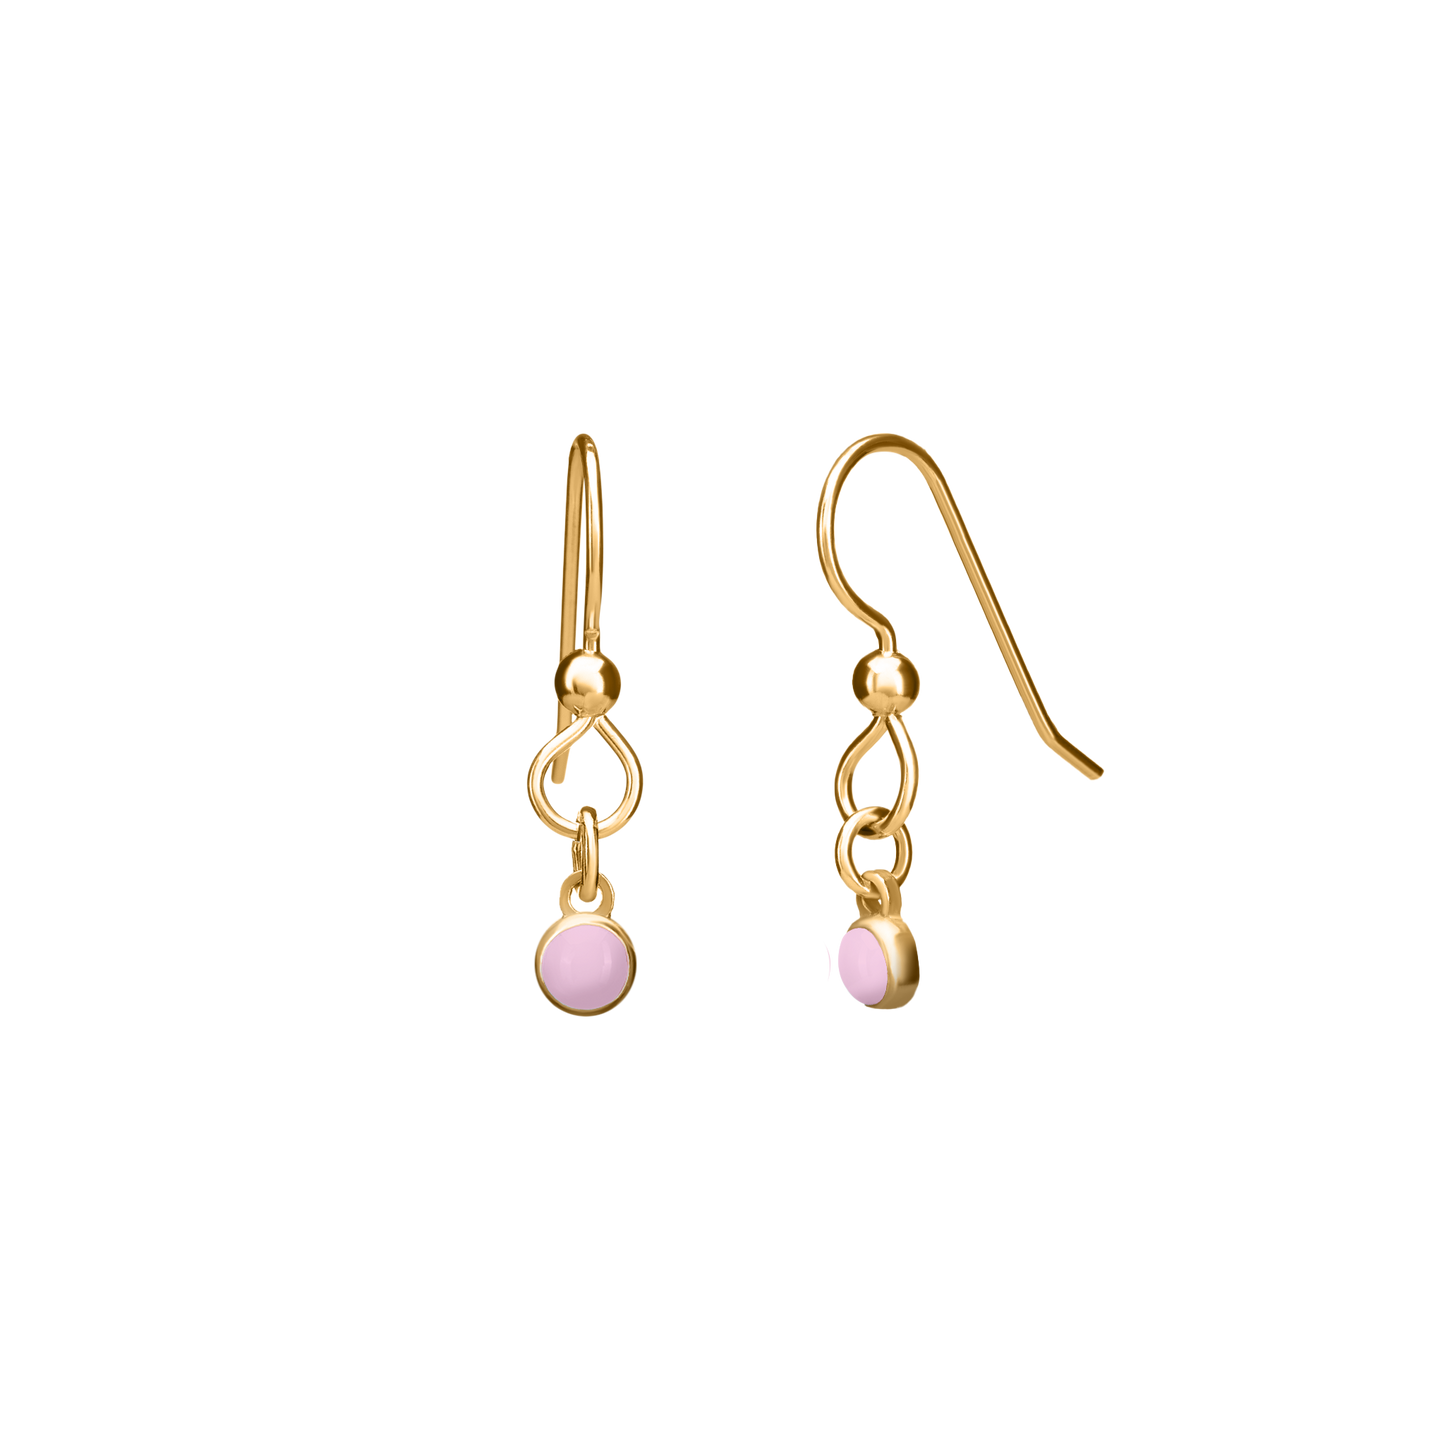 THE PERFECT EARRING  in 14k gold vermeil